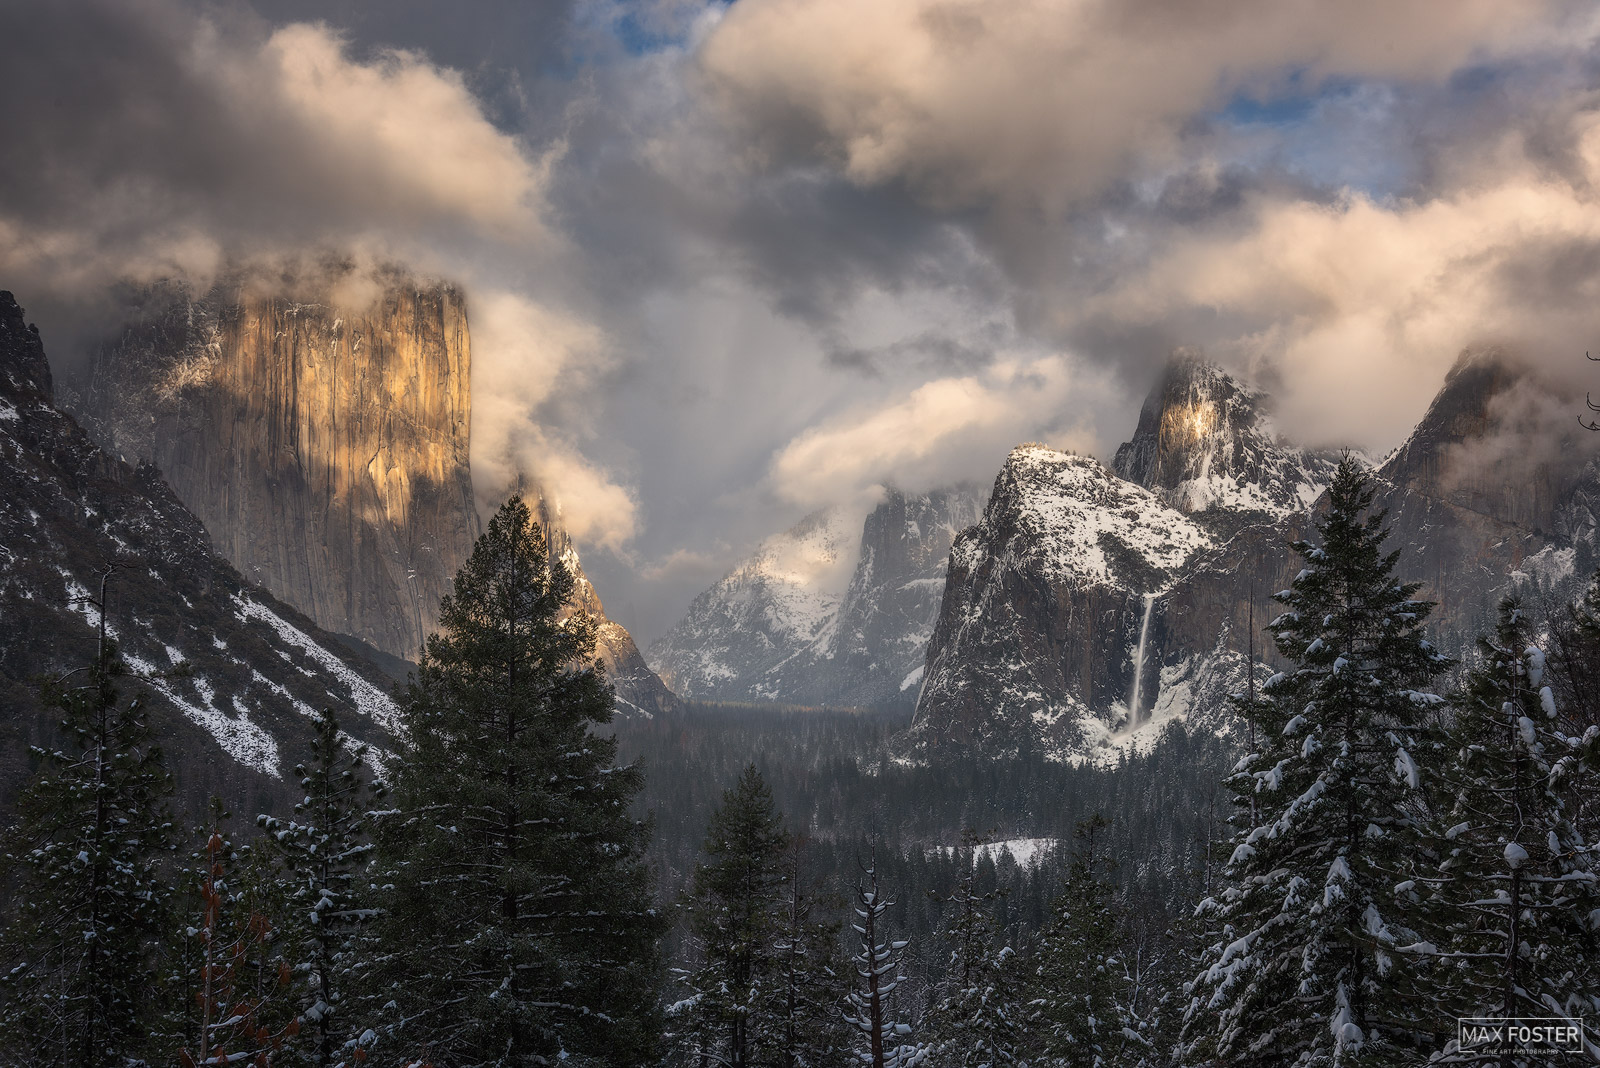 Refresh your space with Majestic Valley, Max Foster's limited edition photography print of Tunnel View in winter at Yosemite...